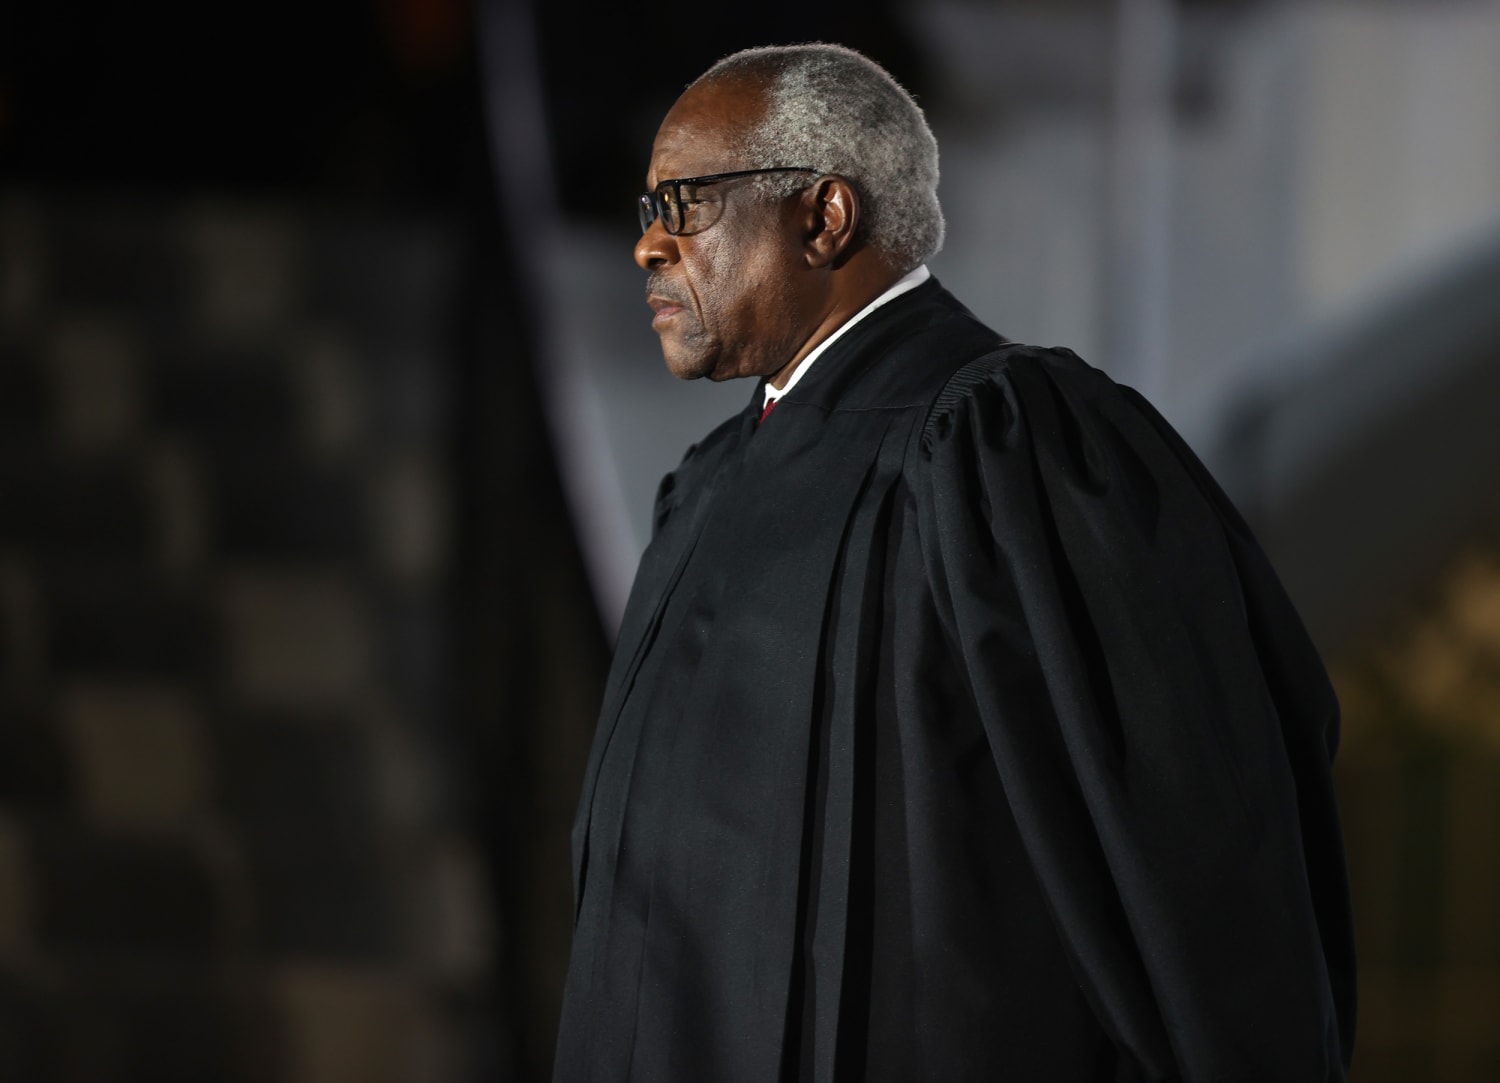 Clarence Thomas says trips paid for by billionaire were ‘personal hospitality,’ not business